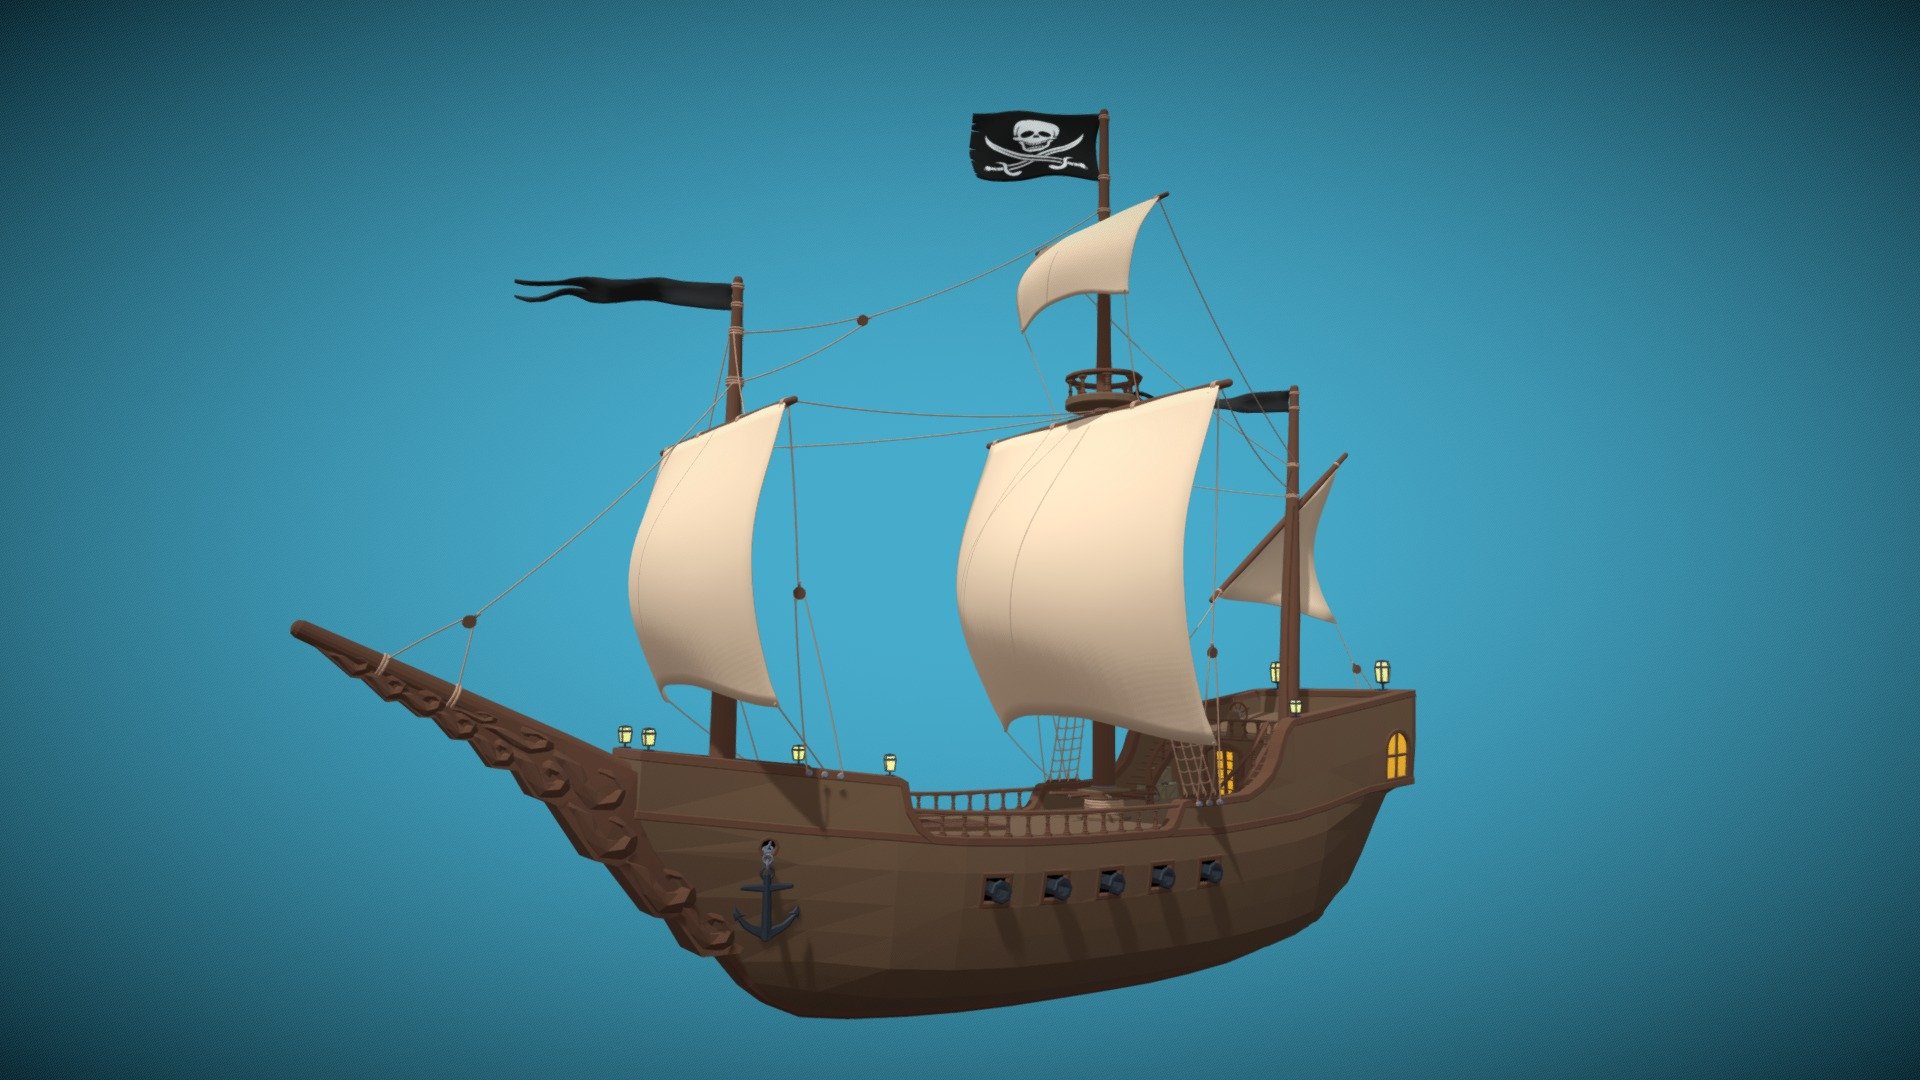 Low Poly pirate ship in .FBX format, ready to use for Unreal Engine and Unity among others.

The Galleon type ship is low poly but still has lots of detail, enough to be used up close in first person games.

This ship is part of my pirate ship pack available here: https://sketchfab.com/3d-models/stylized-low-poly-pirate-ship-pack-2f779c511c1146f68a788180e03c5e63

Also check out my other pirate / island themed assets:
https://sketchfab.com/RagingRocket/models - Stylized Low Poly Pirate Ship Galleon - Buy Royalty Free 3D model by Raging Rocket (@RagingRocket) 3d model